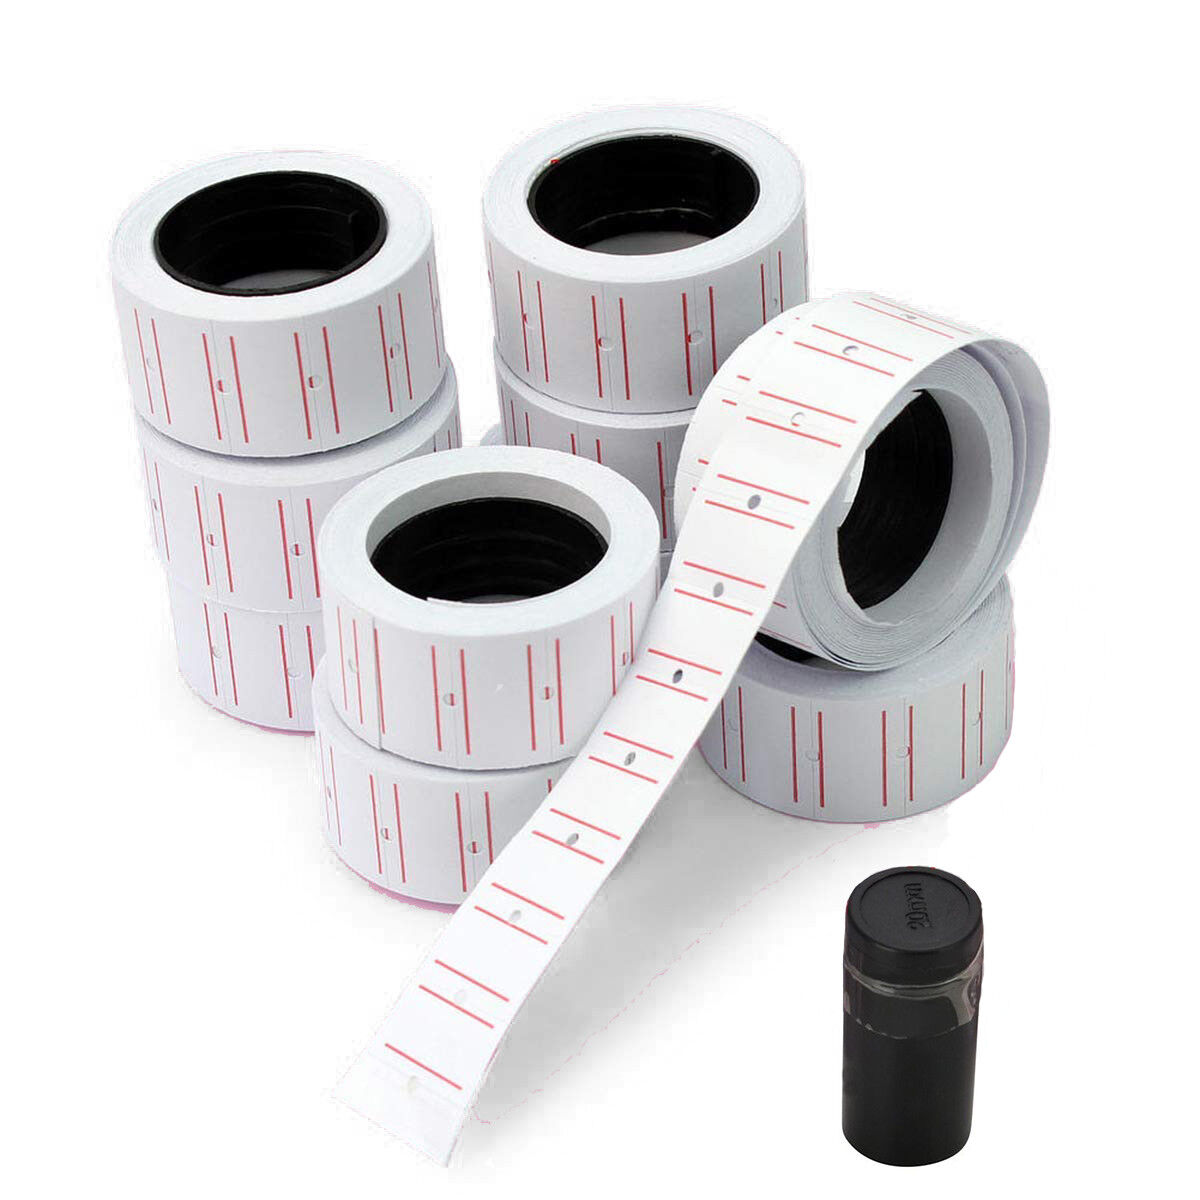 10 Rolls Price Tags Gun Labels 6000 Stickers For MX-5500 With Refill Ink Unbranded Does Not Apply